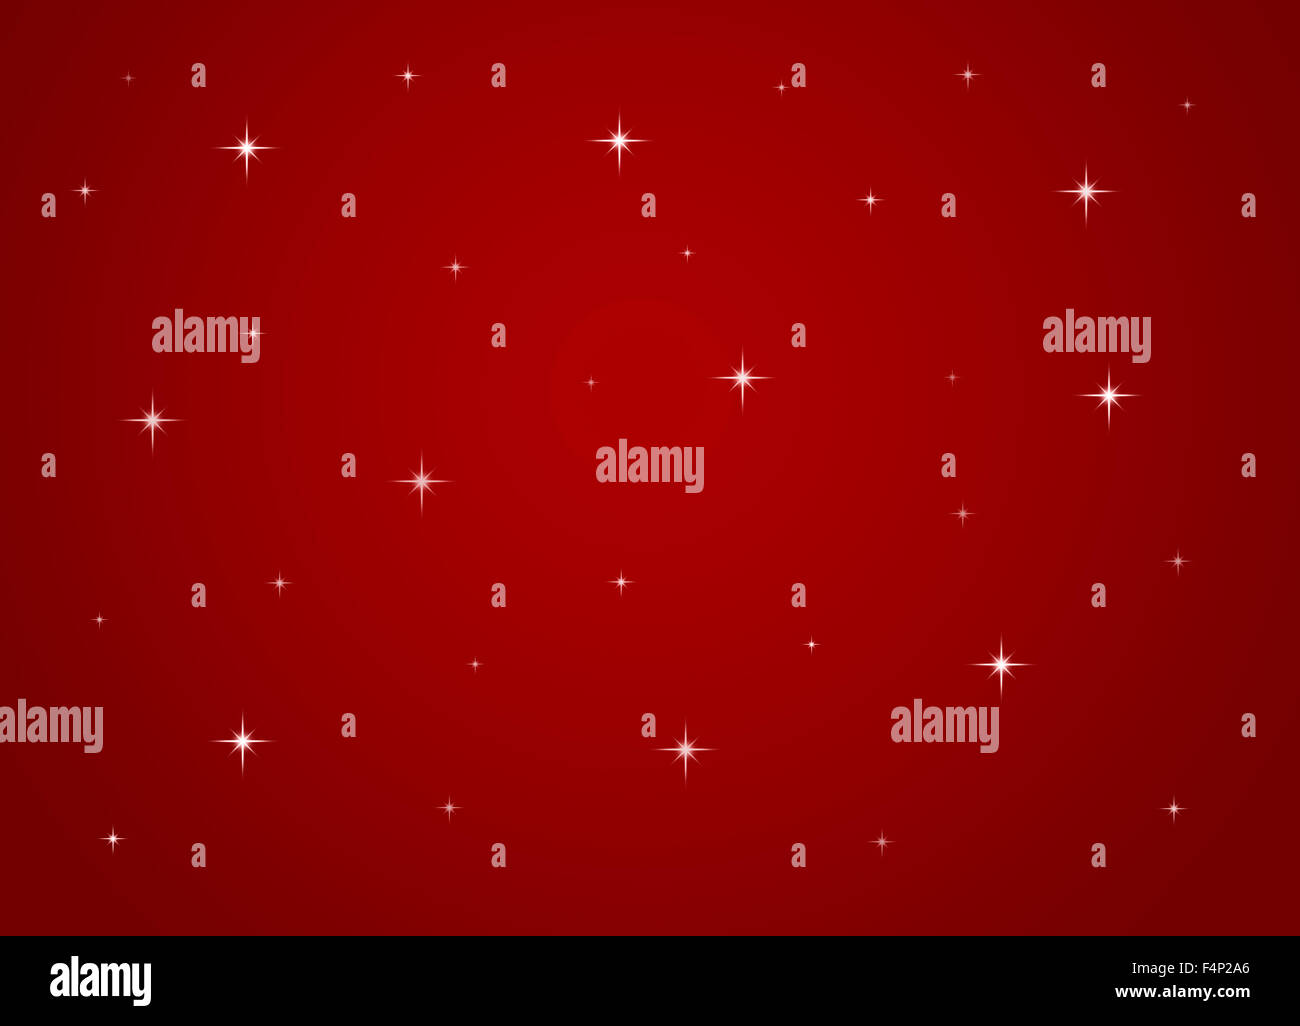 Stars on red background Stock Photo